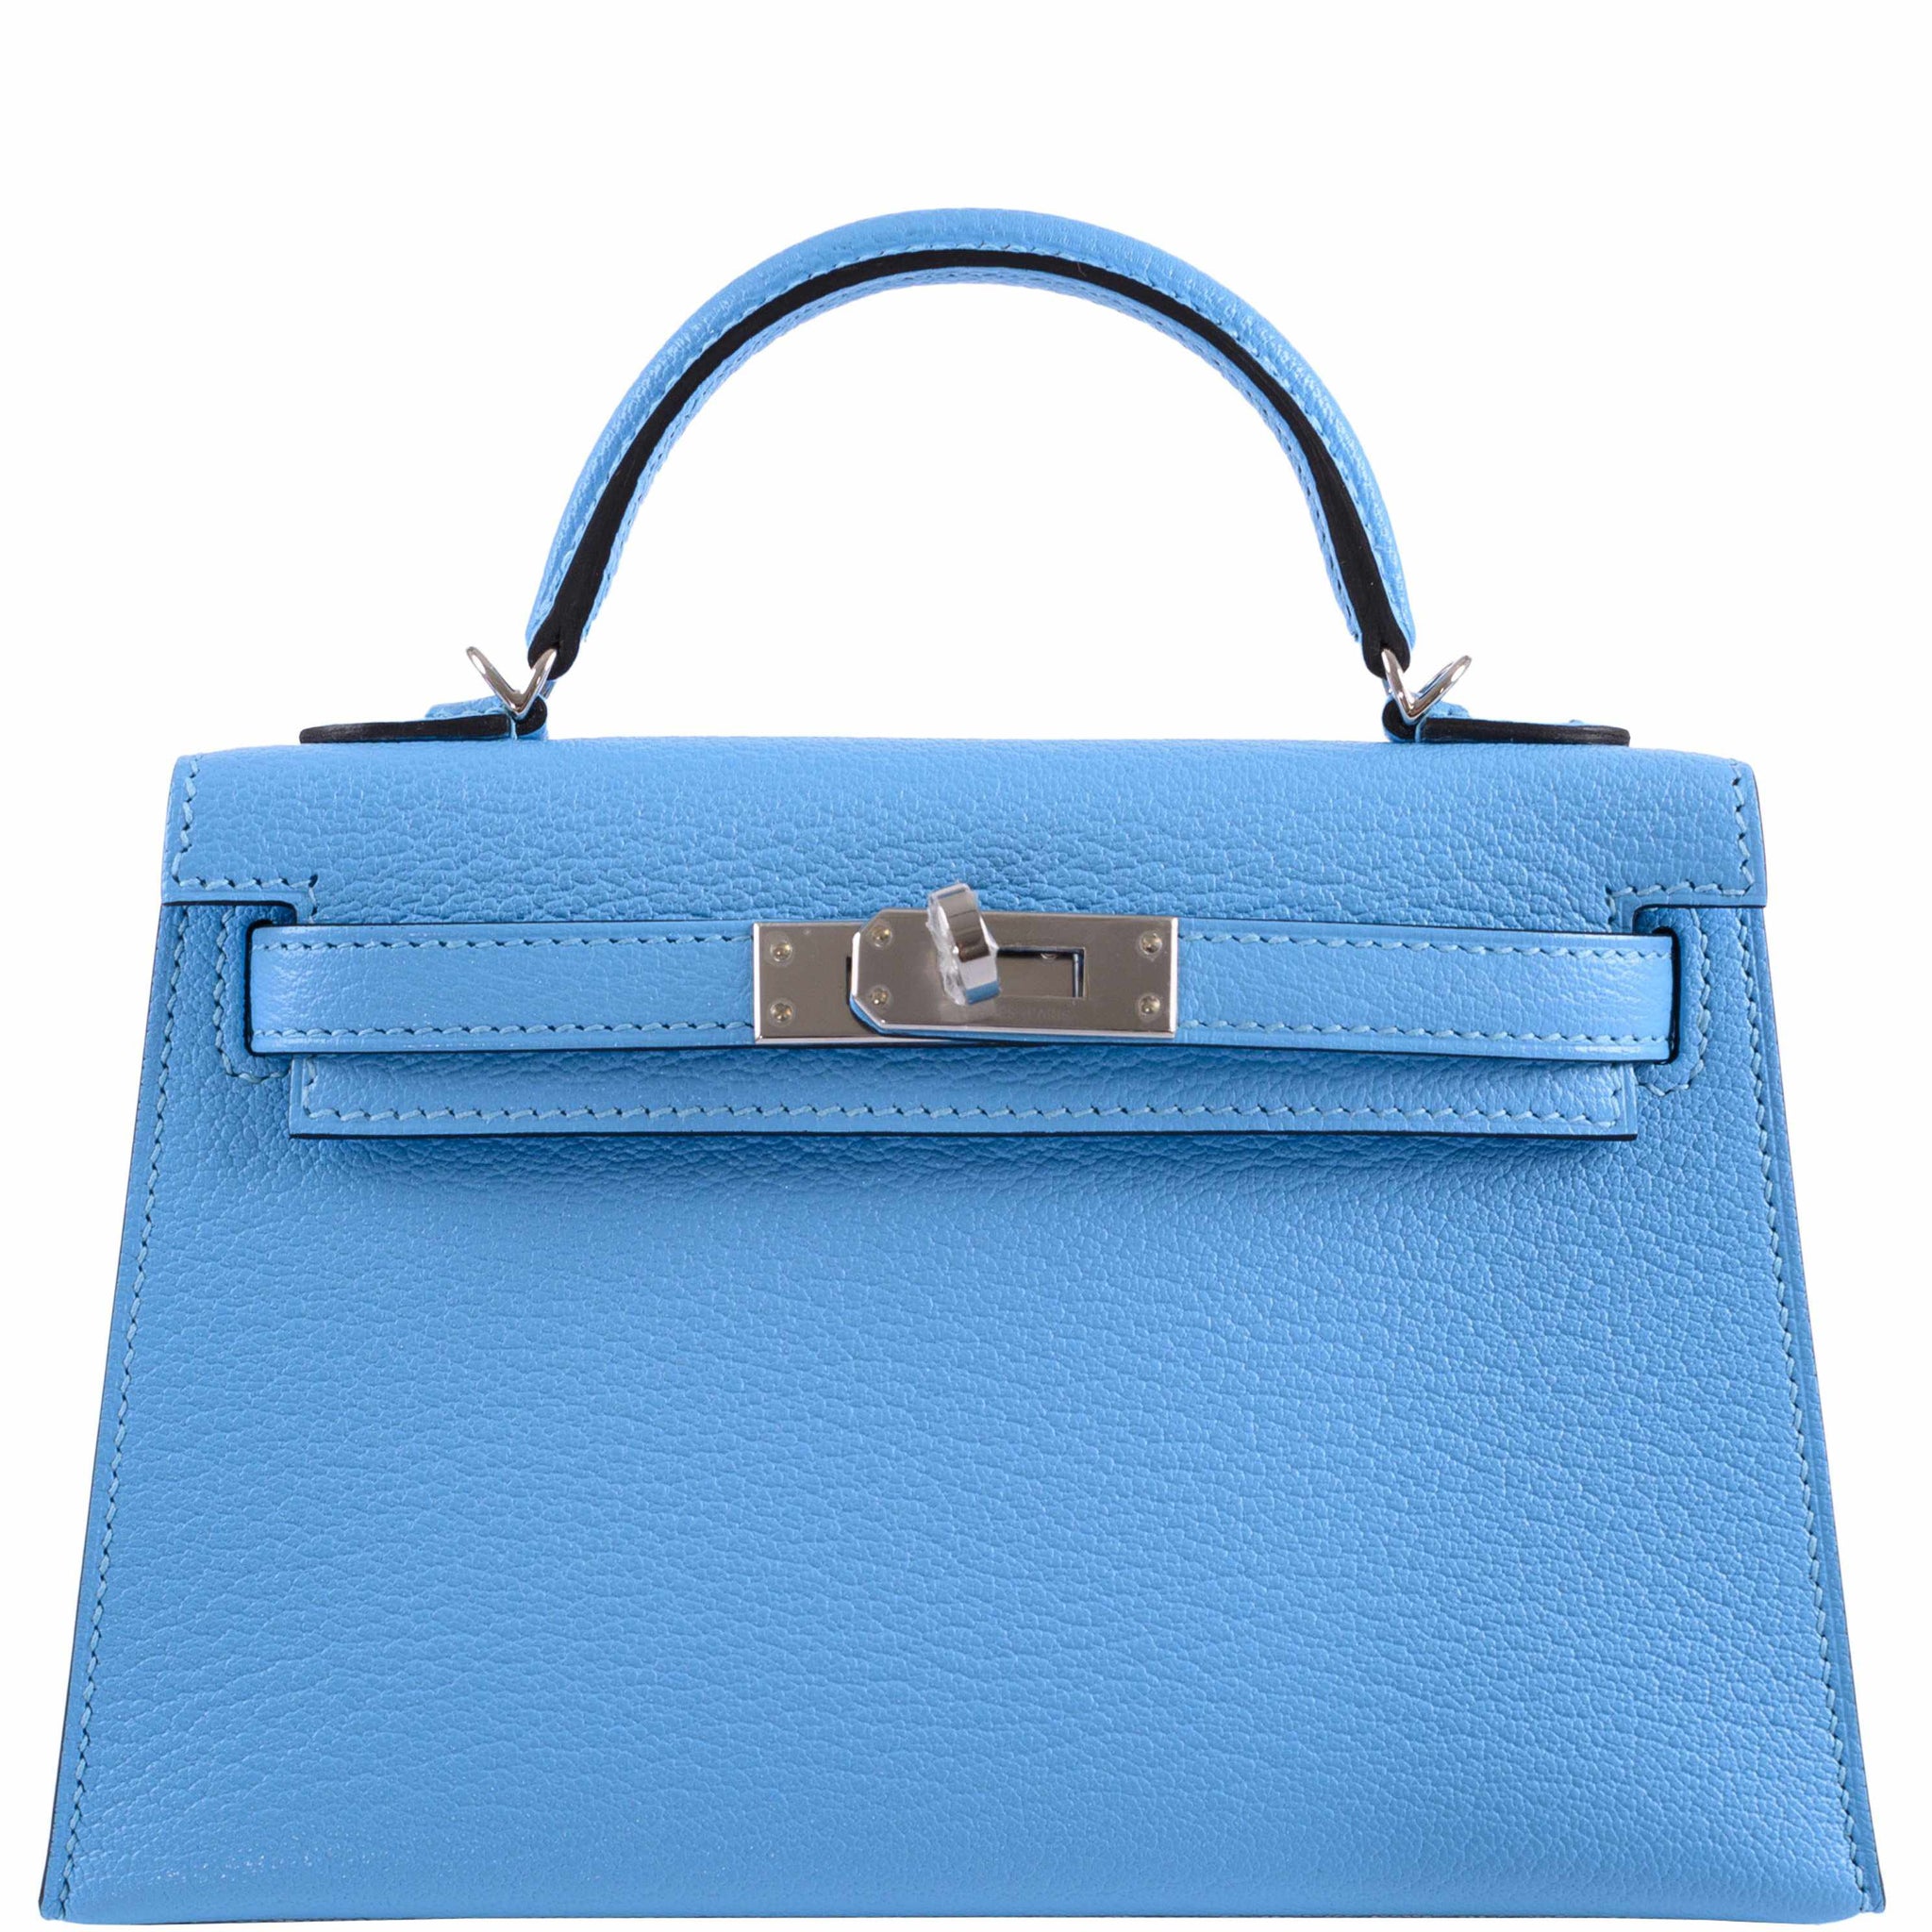 Hermes Kelly 20 Mini Sellier Bag Blue de Royal Chevre Leather Gold Hardware  • MIGHTYCHIC • 